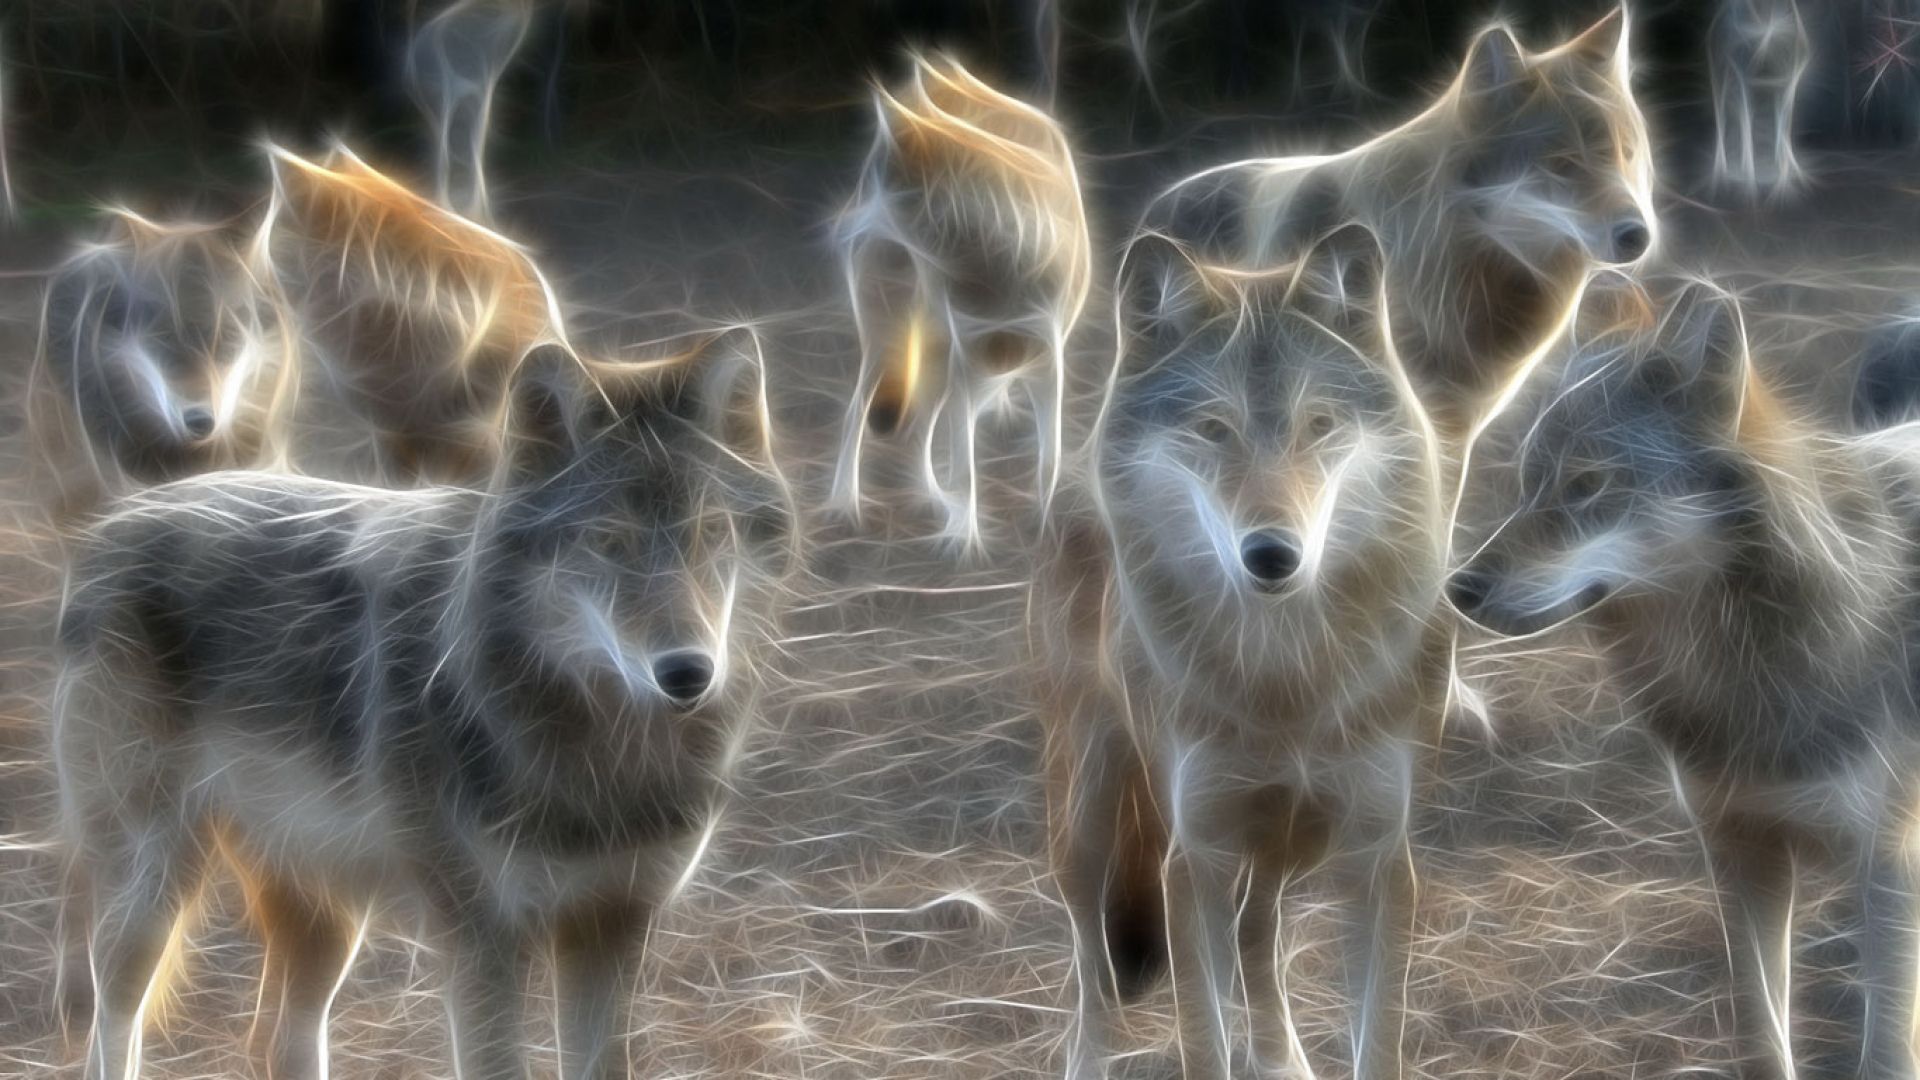 Cool animated wolf picture wallpaper